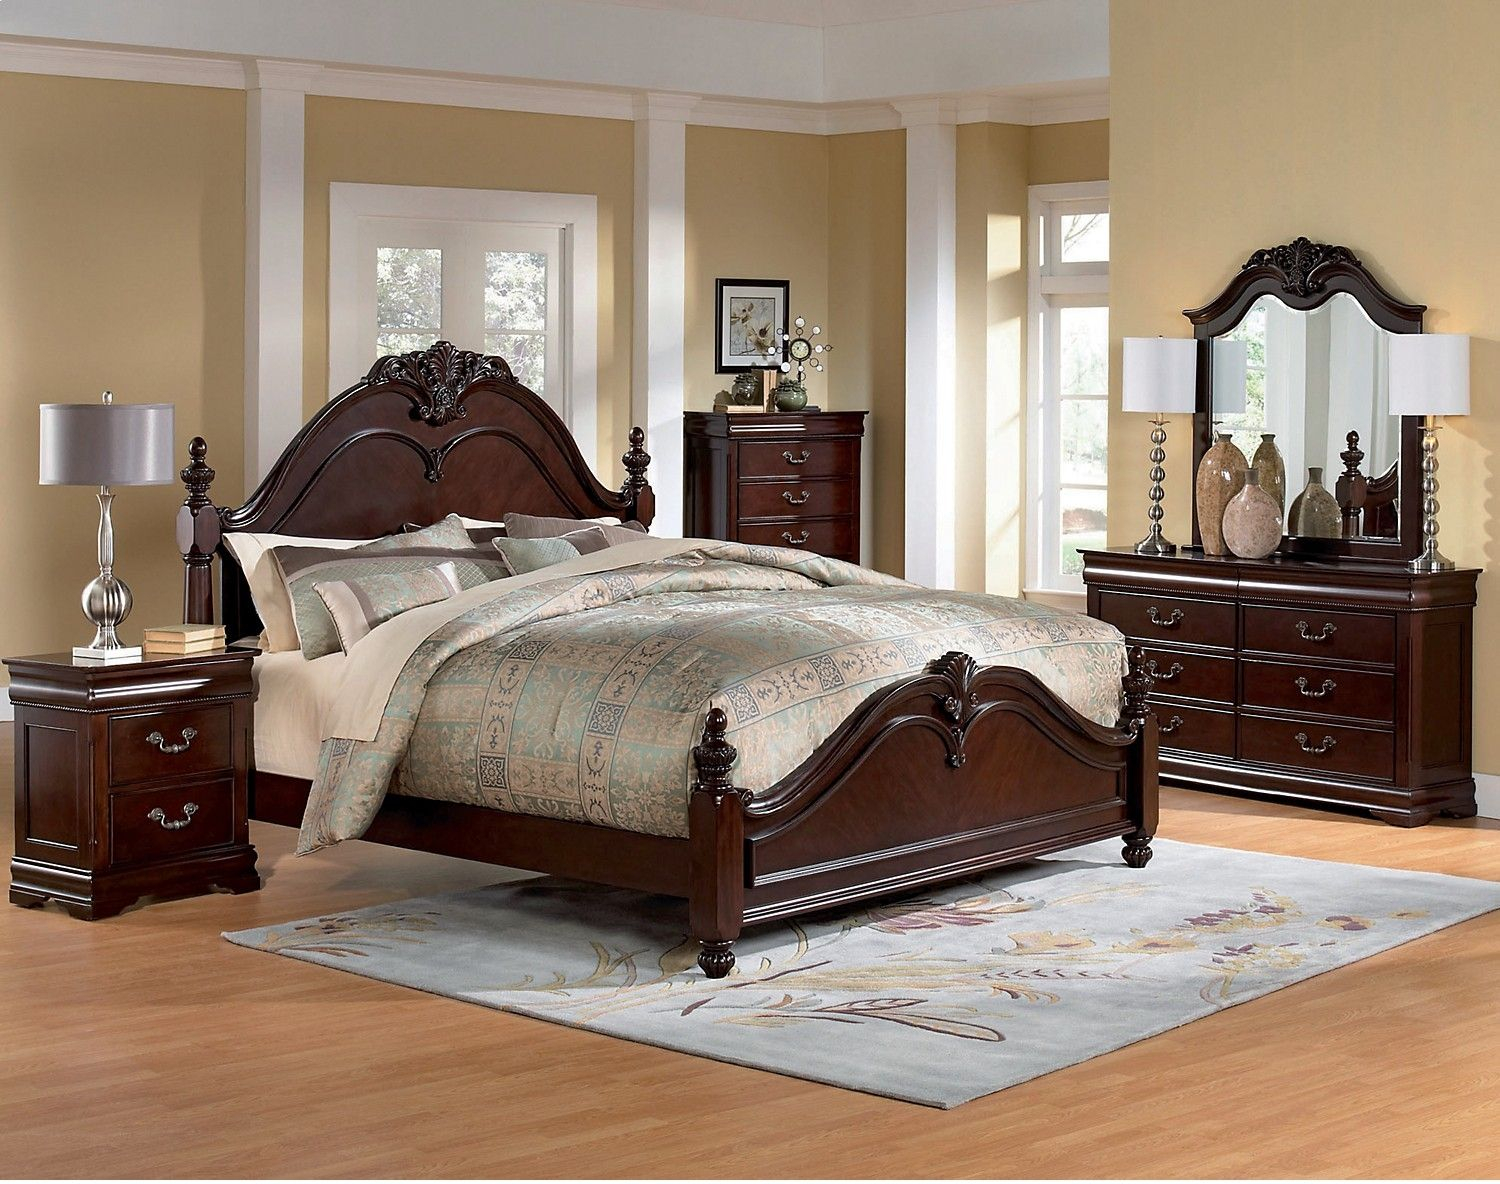 Westchester 5 Piece King Bedroom Set The Brick House And Home inside proportions 1500 X 1184